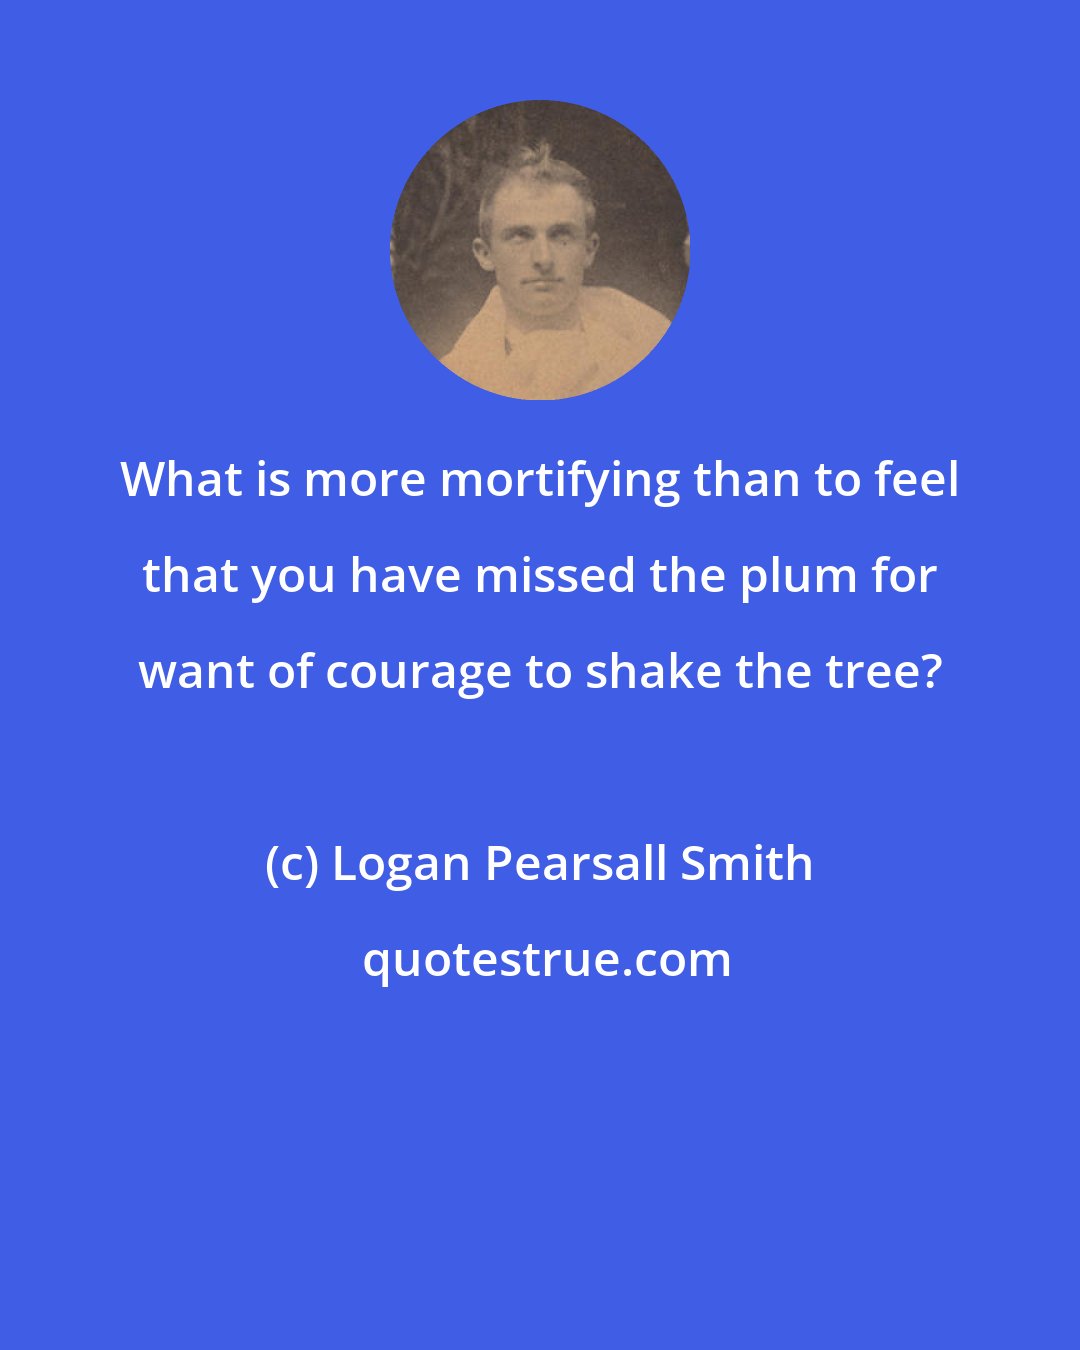 Logan Pearsall Smith: What is more mortifying than to feel that you have missed the plum for want of courage to shake the tree?